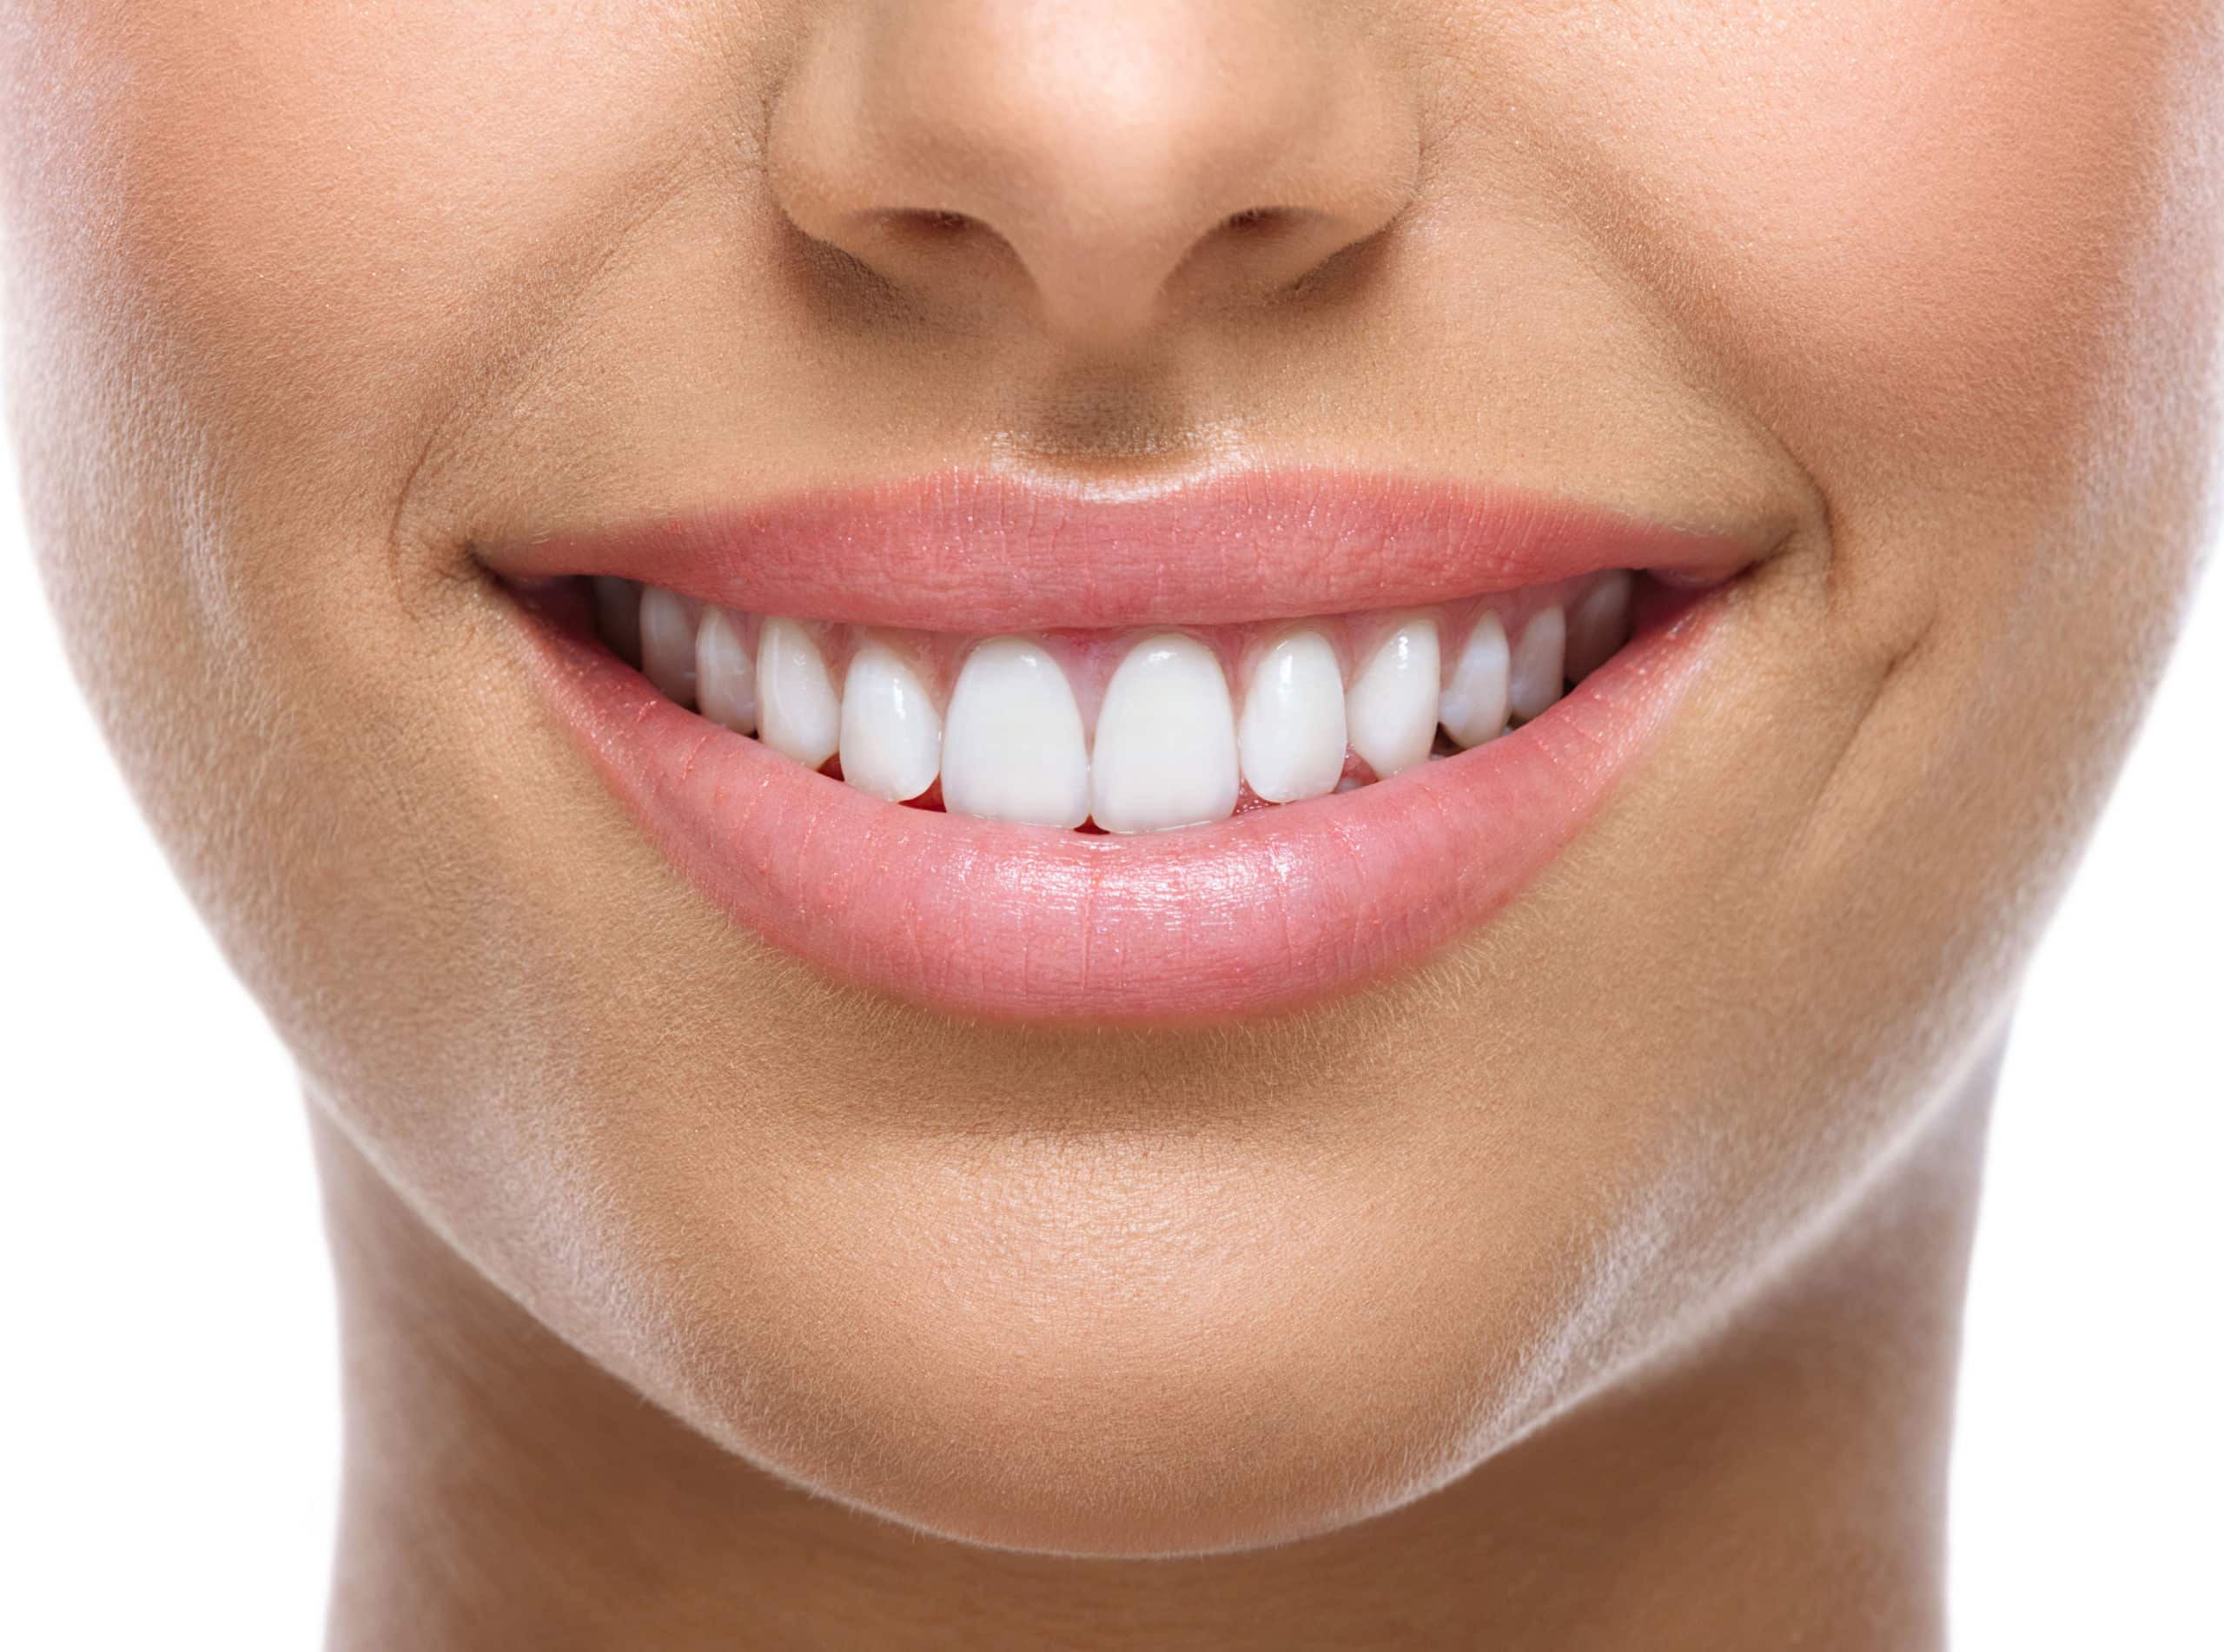 how much are veneers and cost of a full set of veneers